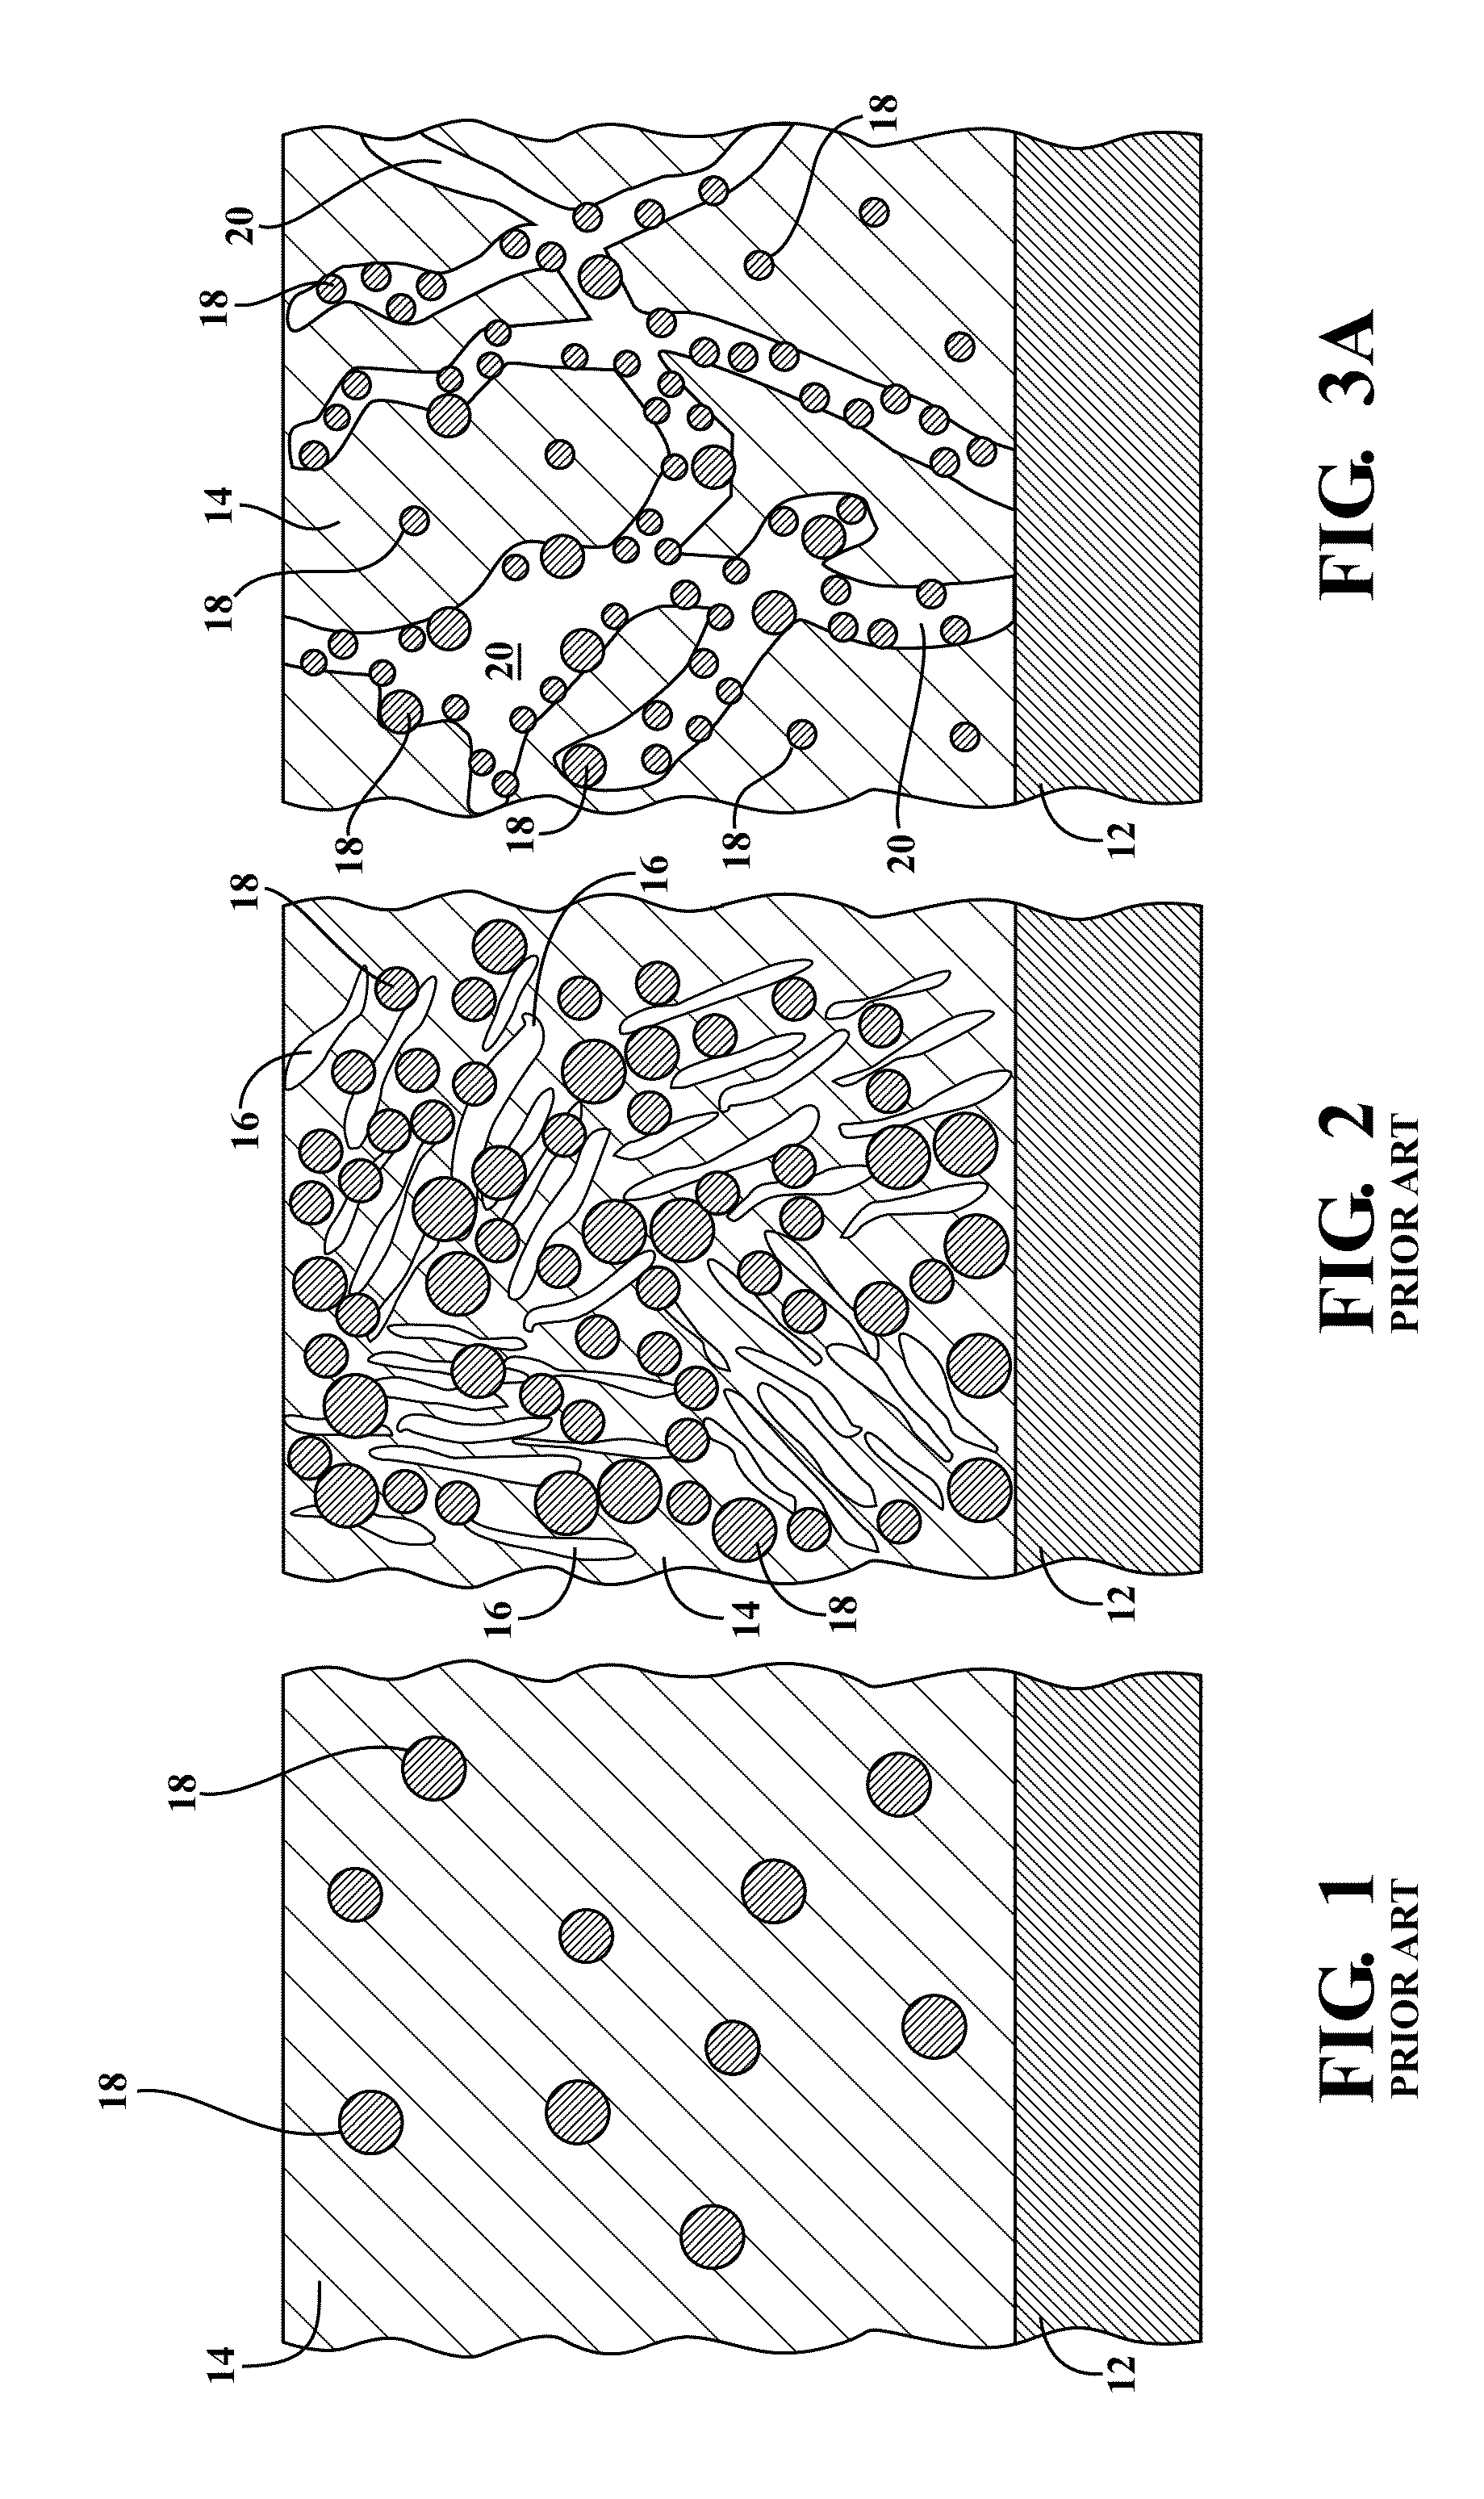 Metal hydride alloy with enhanced surface morphology